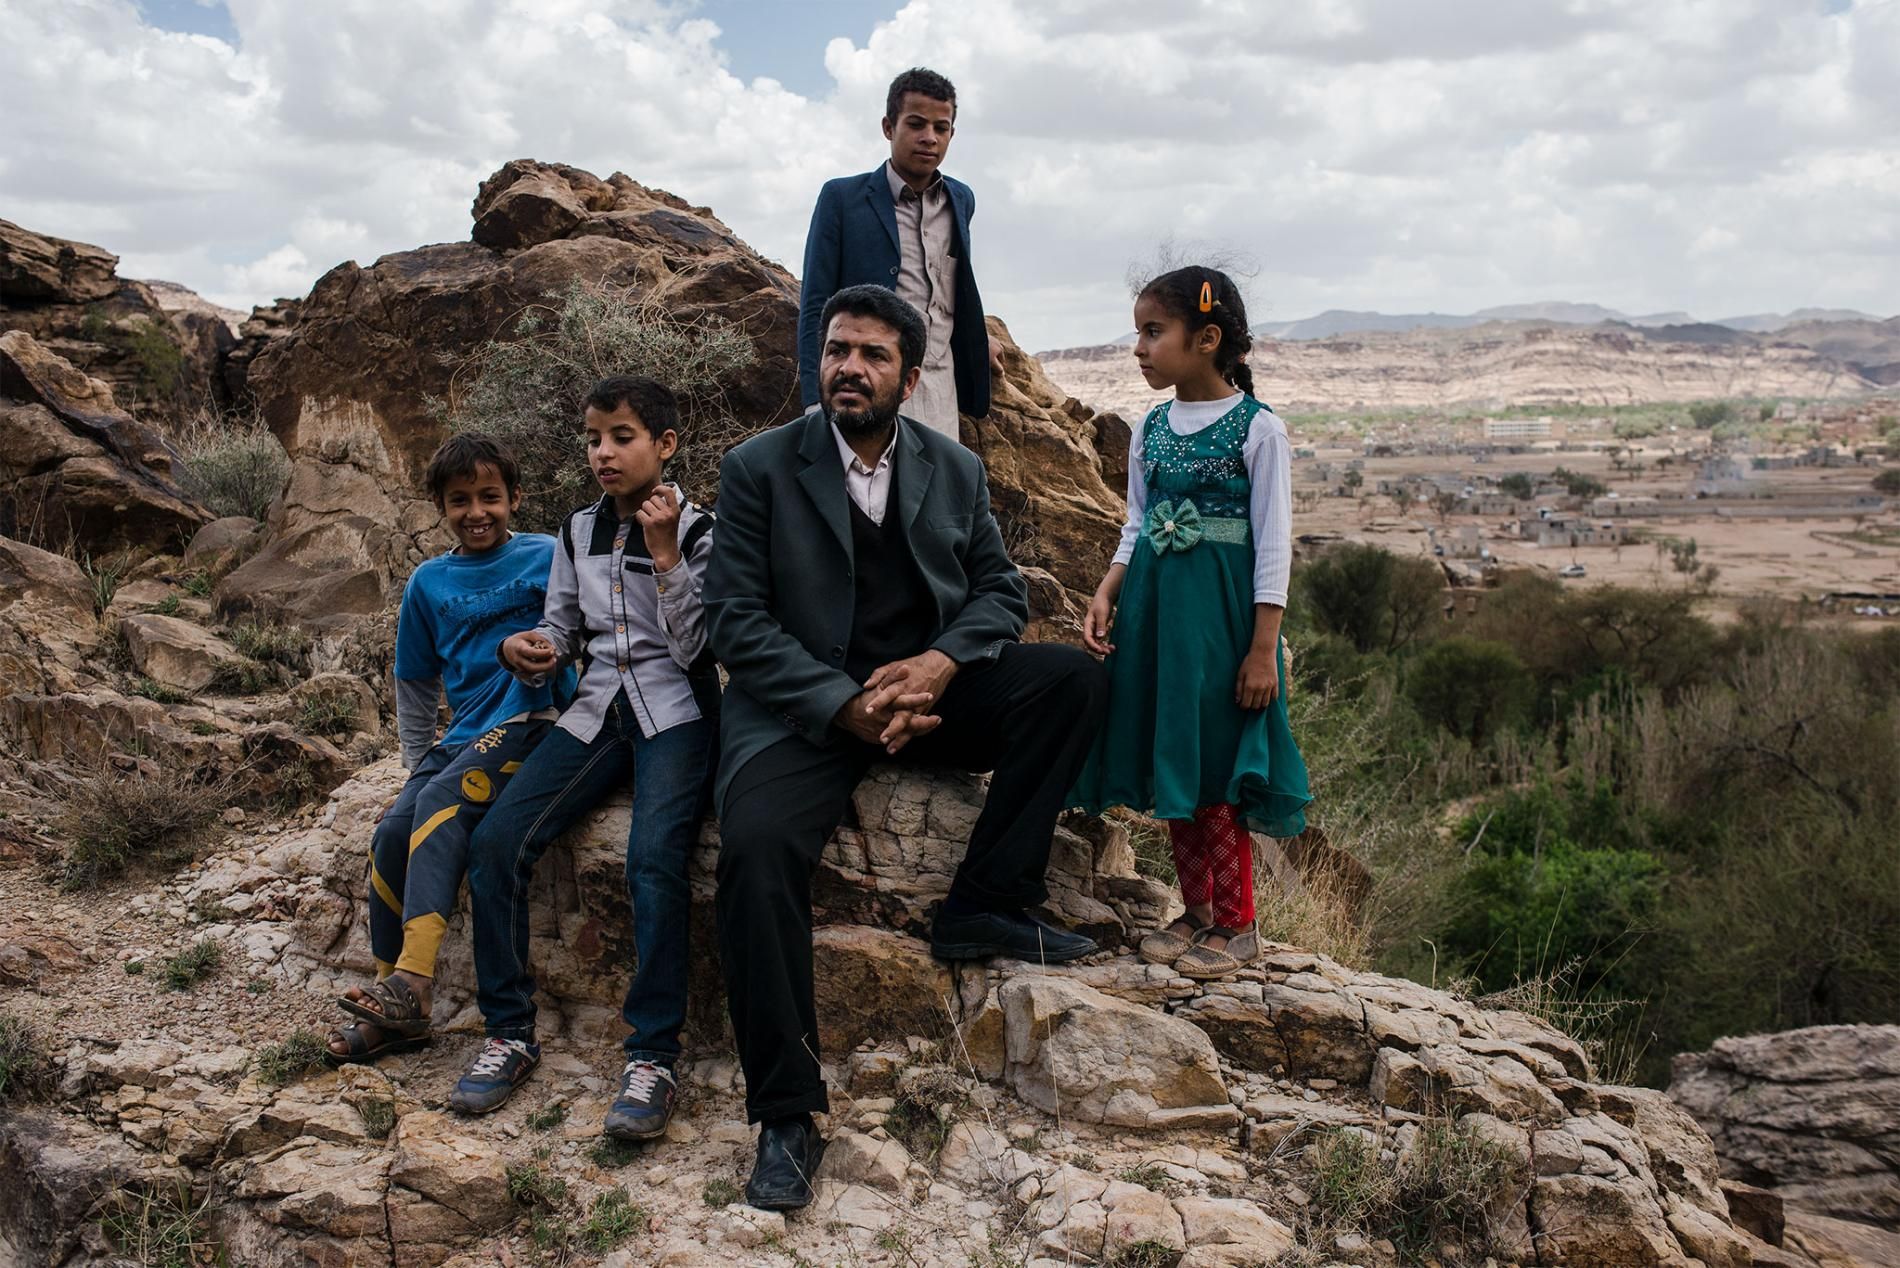 Yahya Abdullah sits with local children near a rocky trail in Wadi Dhahr. Image by Alex Potter. Yemen, 2018.